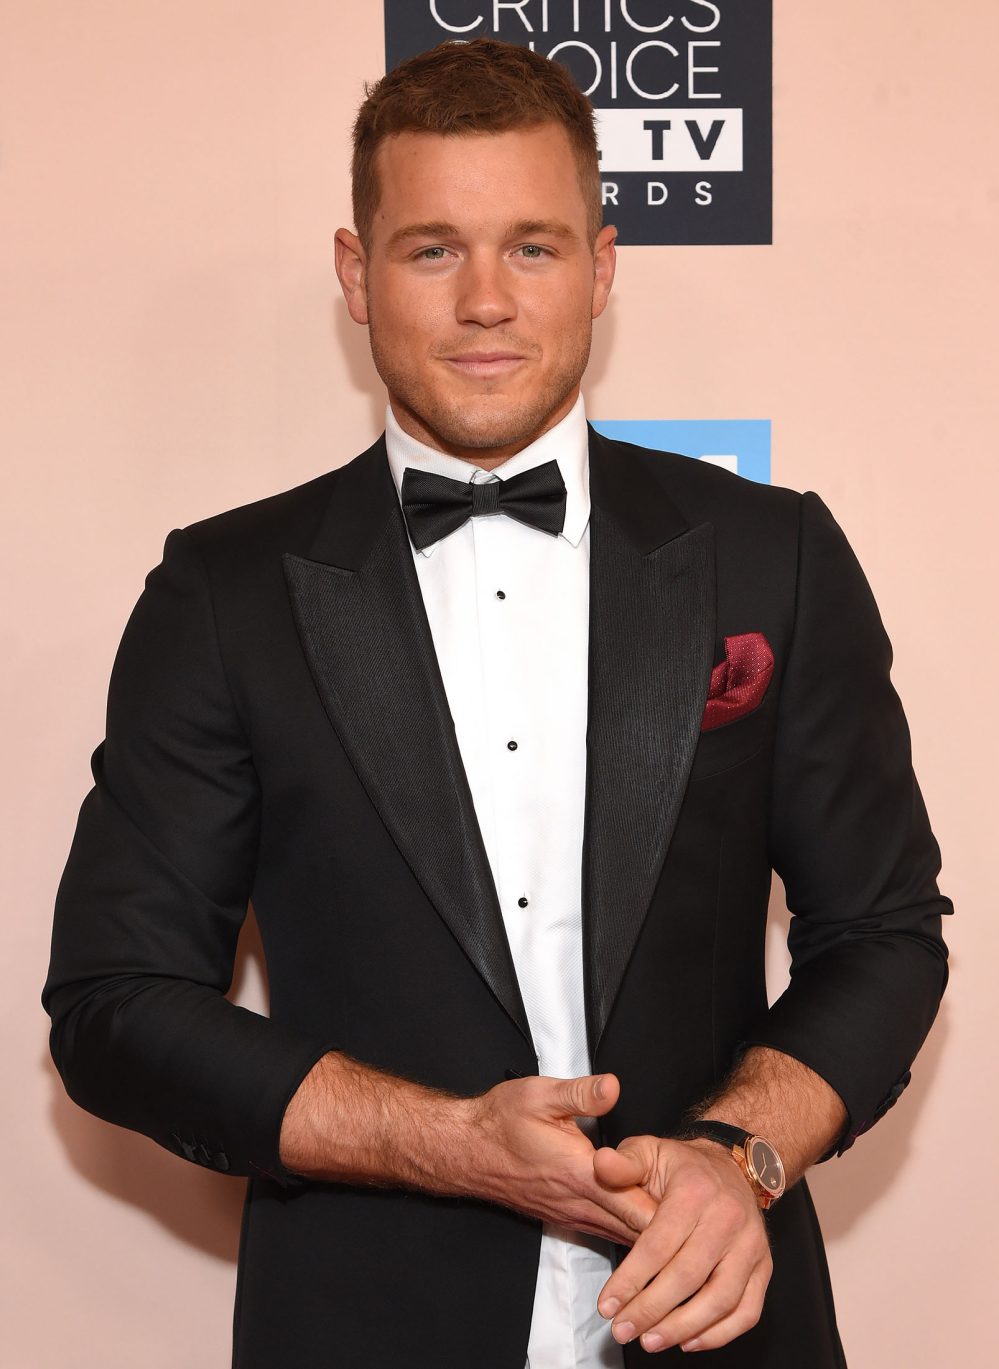 Colton Underwood Hasn't Had an 'Emotional Connection' With a Male Partner